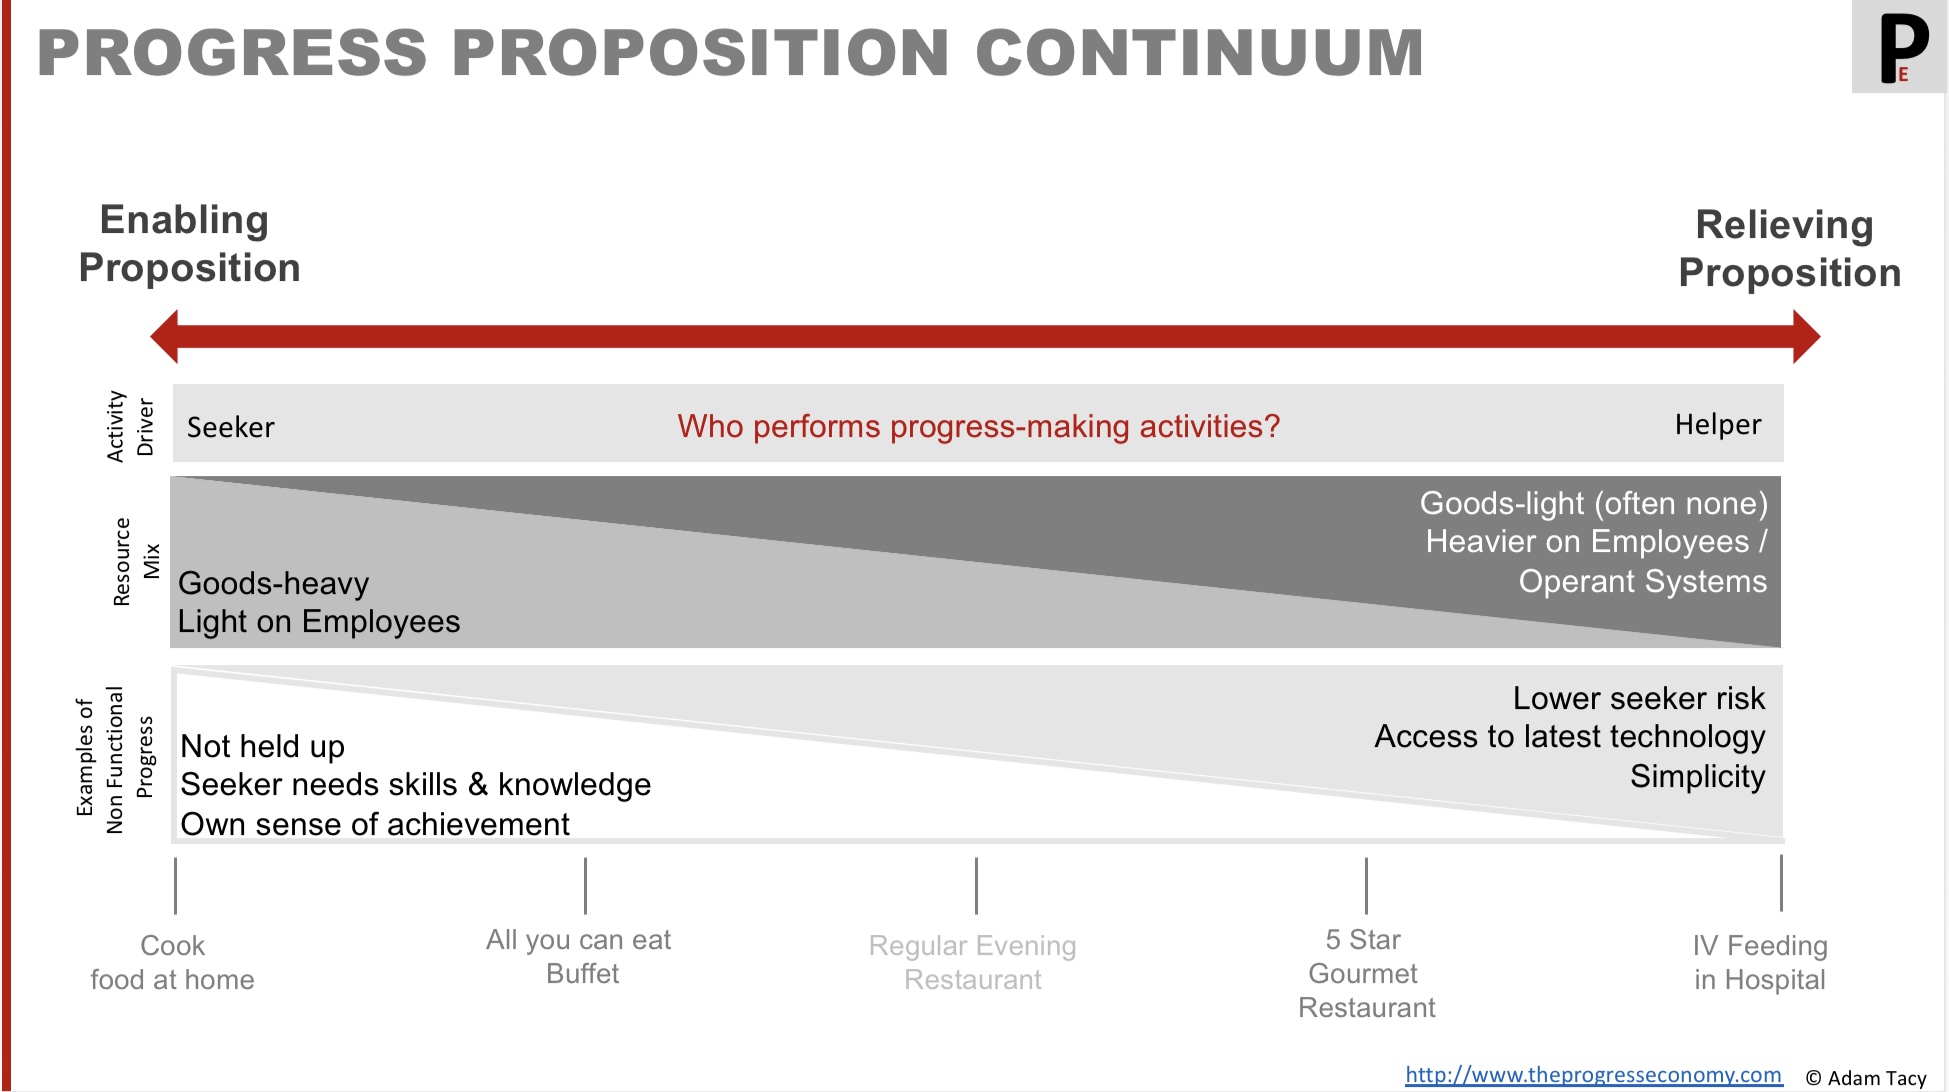 The progress proposition continuum of enabling to relieving propositions. Showing the implications on/of the service mix, non-functional progress sought, and which actor drives the activities involved in the process of making progress.